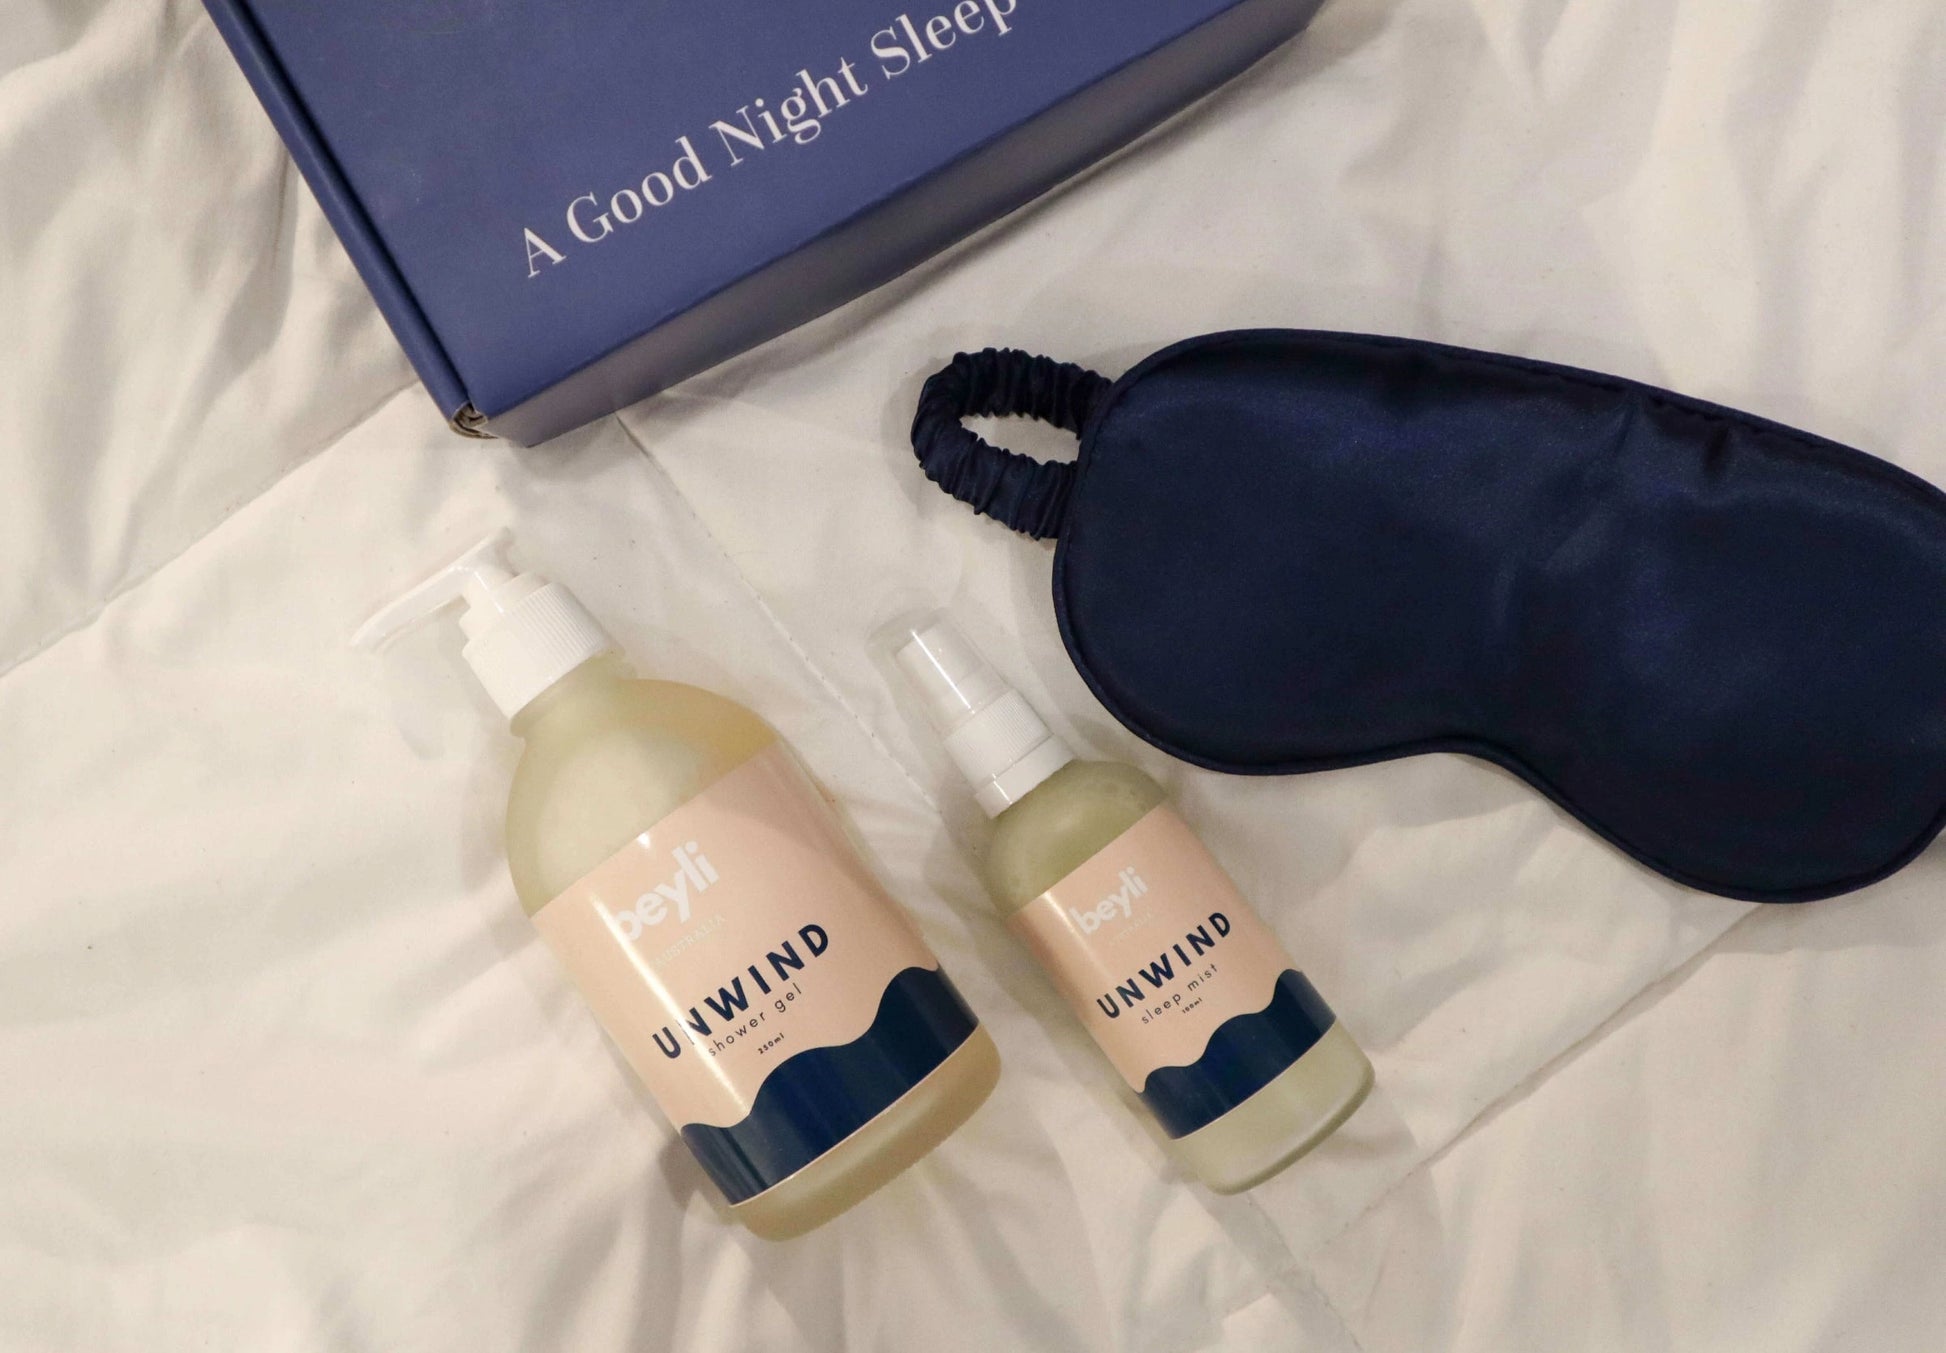 A sleep improvement kit featuring a mist and a blue eye mask on a nightstand